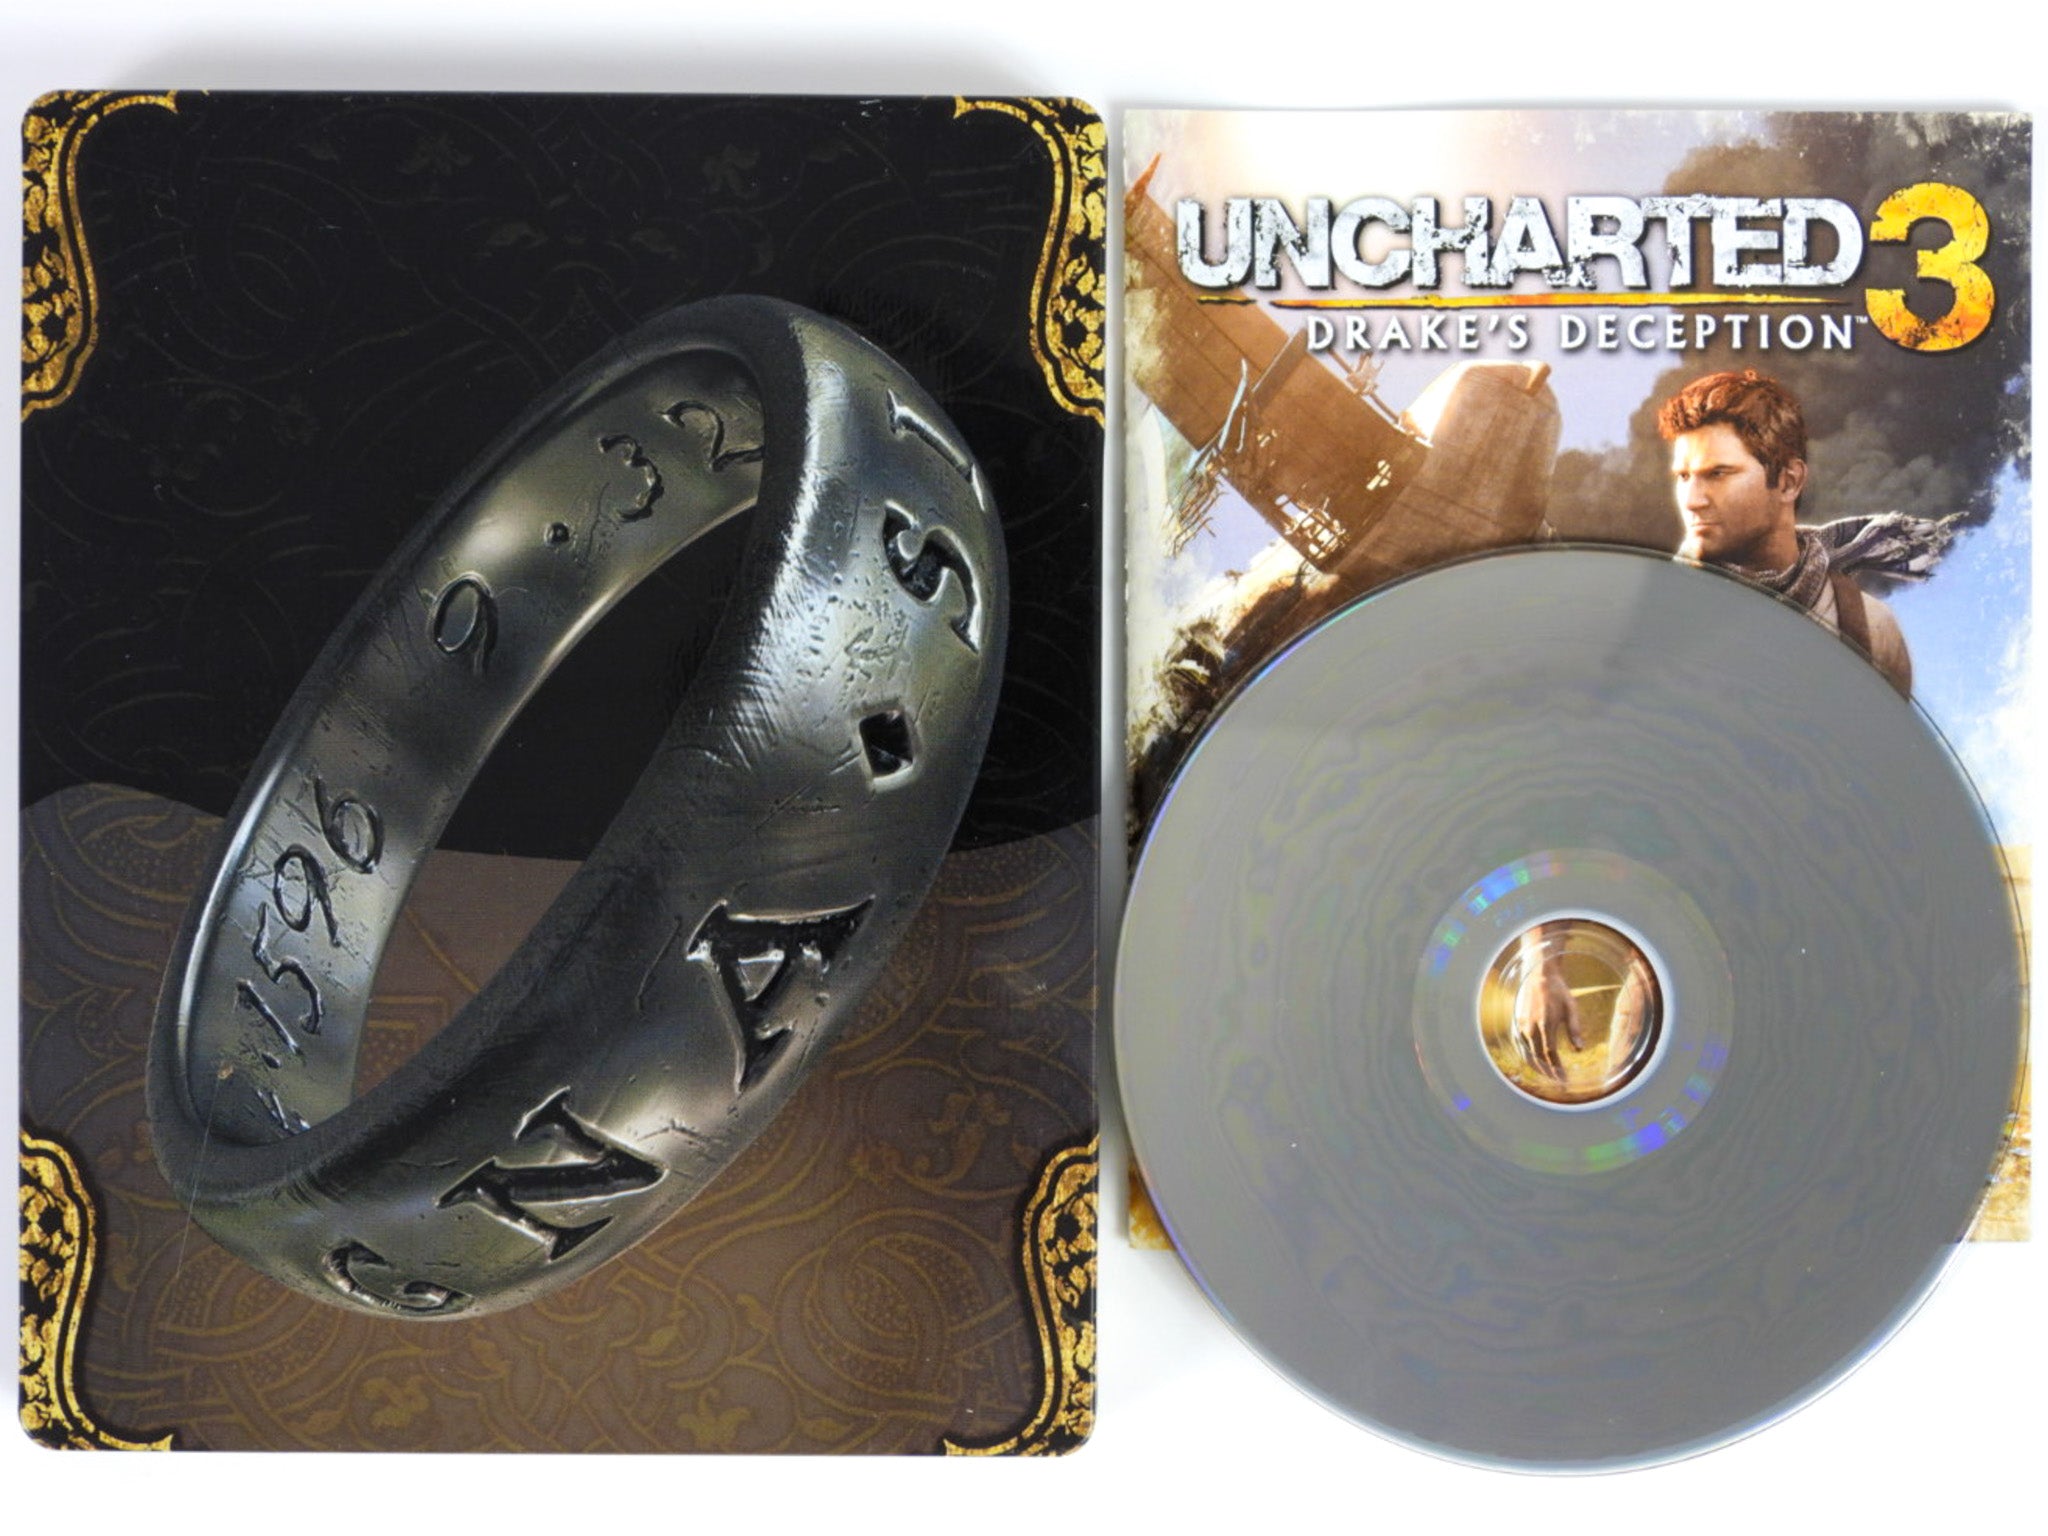 Playstation 3 - Uncharted 3 Drake's Deception {PRICE DROP}